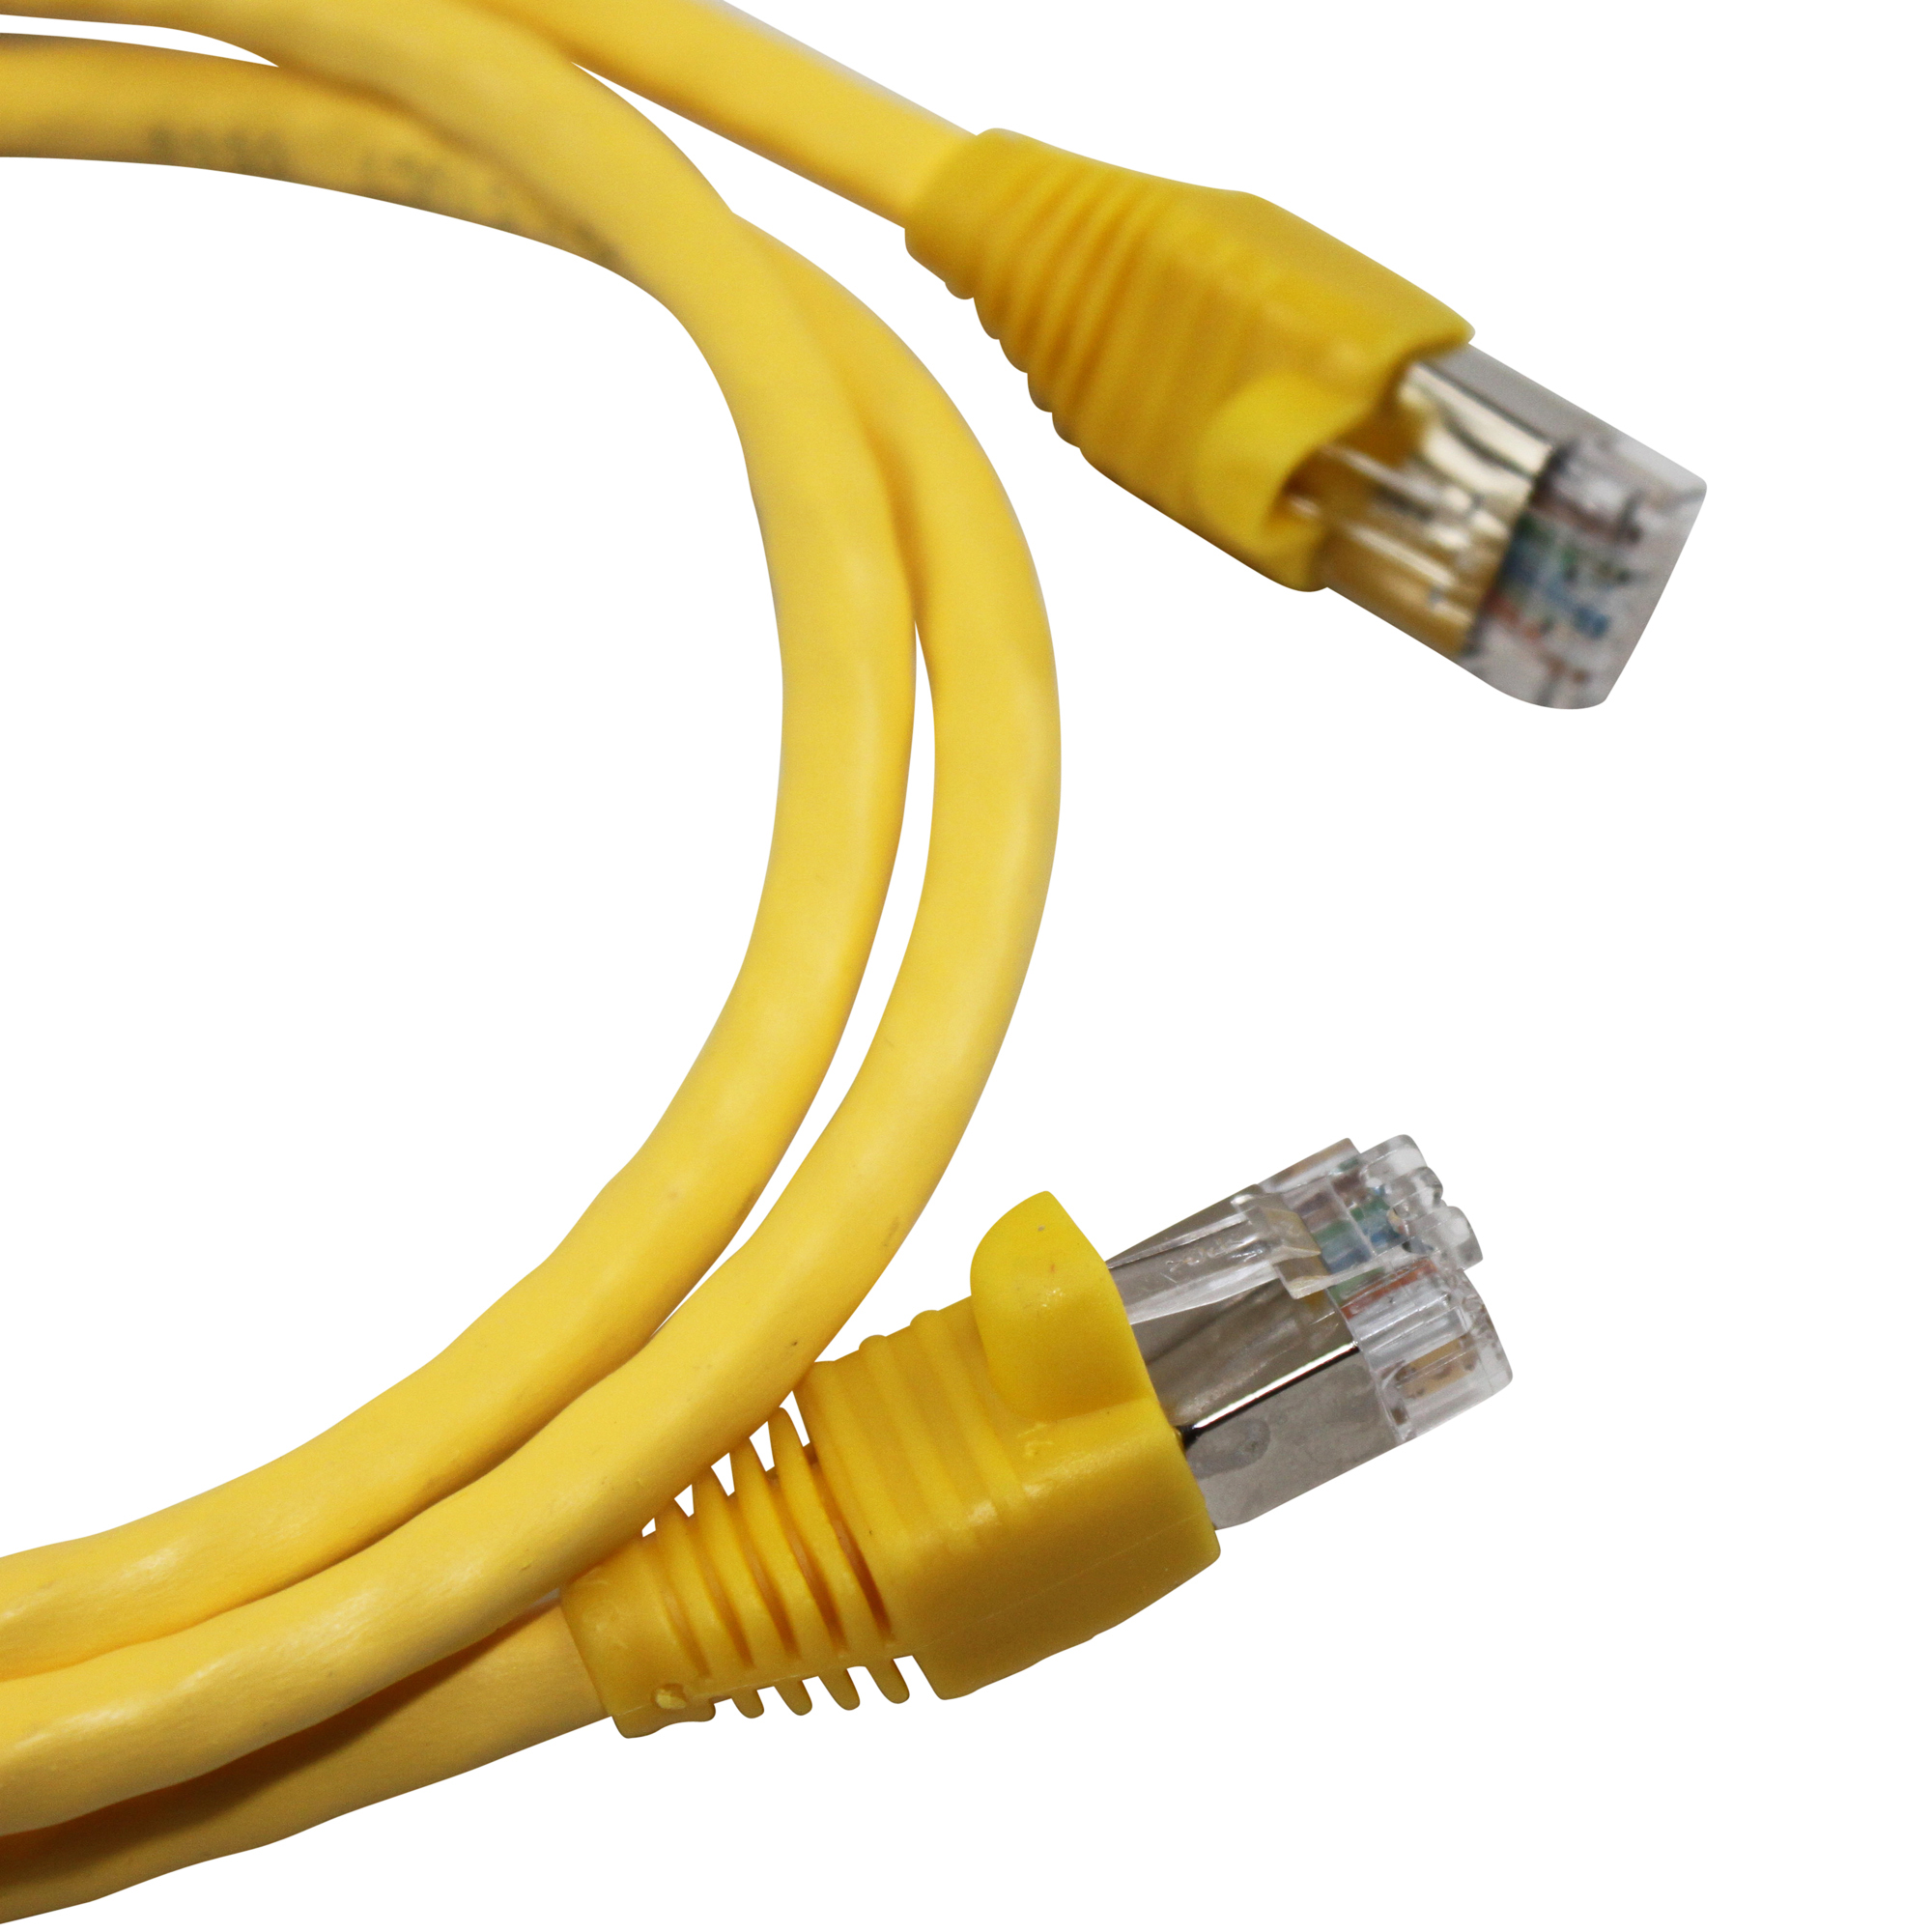 TYCO AMP 2198903 YELLOW 3' CAT6 CATEGORY 6 PATCH CORD CABLE (5 PACK